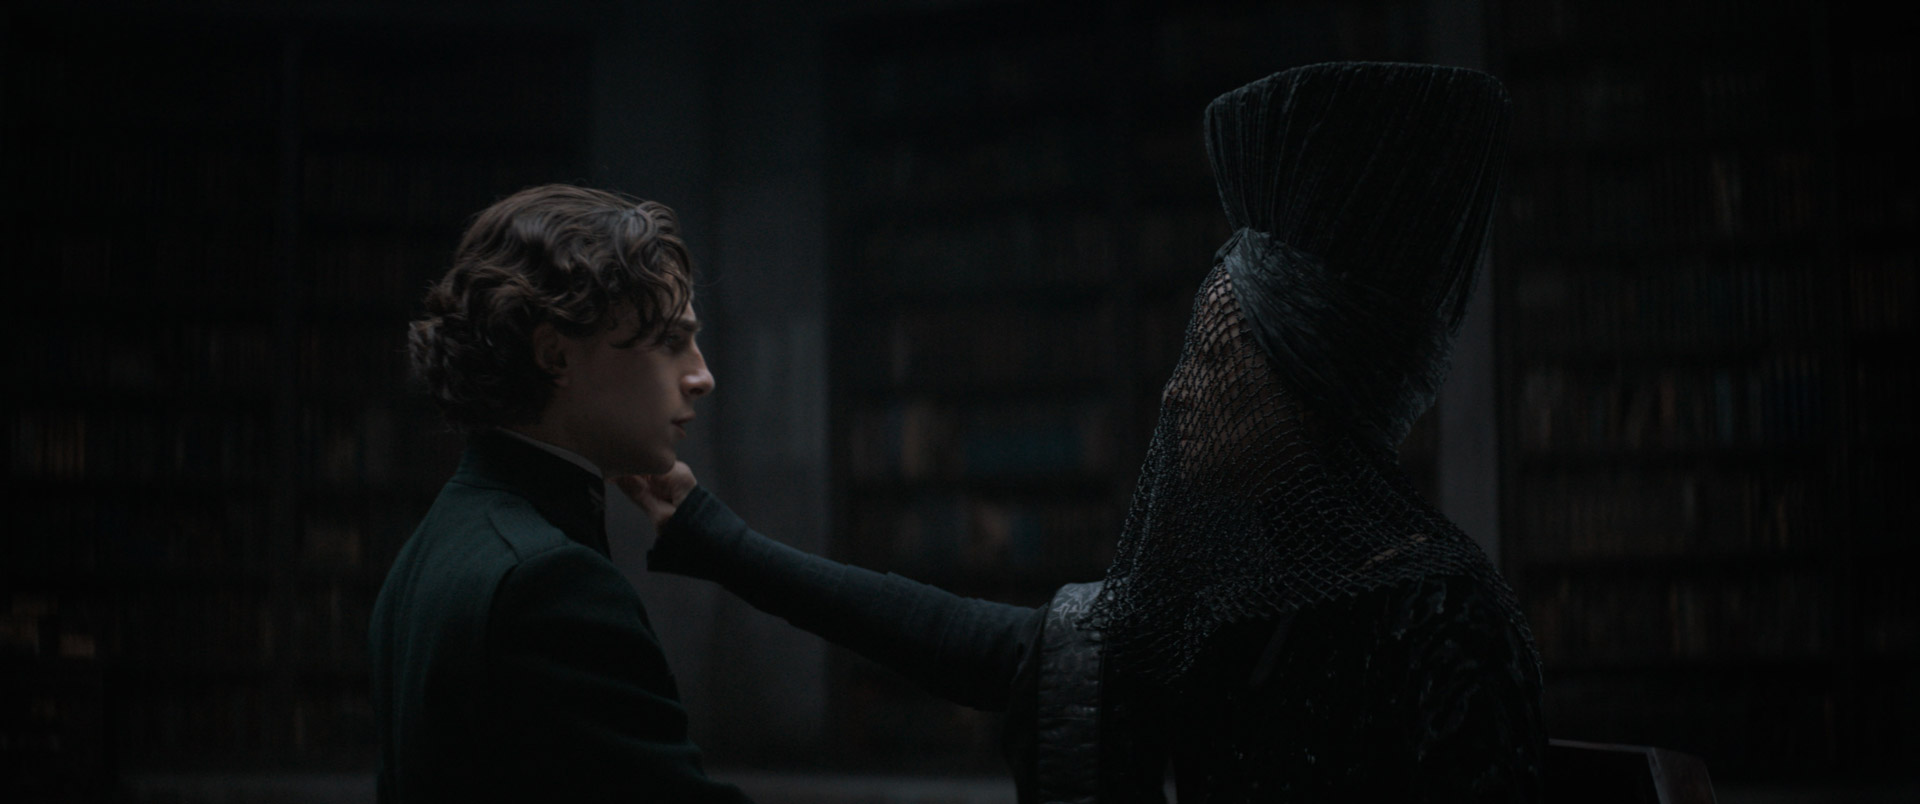 Reverend Mother Gaius Helen Mohiam (Charlotte Rampling) holds the Gom Jabbar to the neck of Paul Atriedes (Timothée Chalamet).